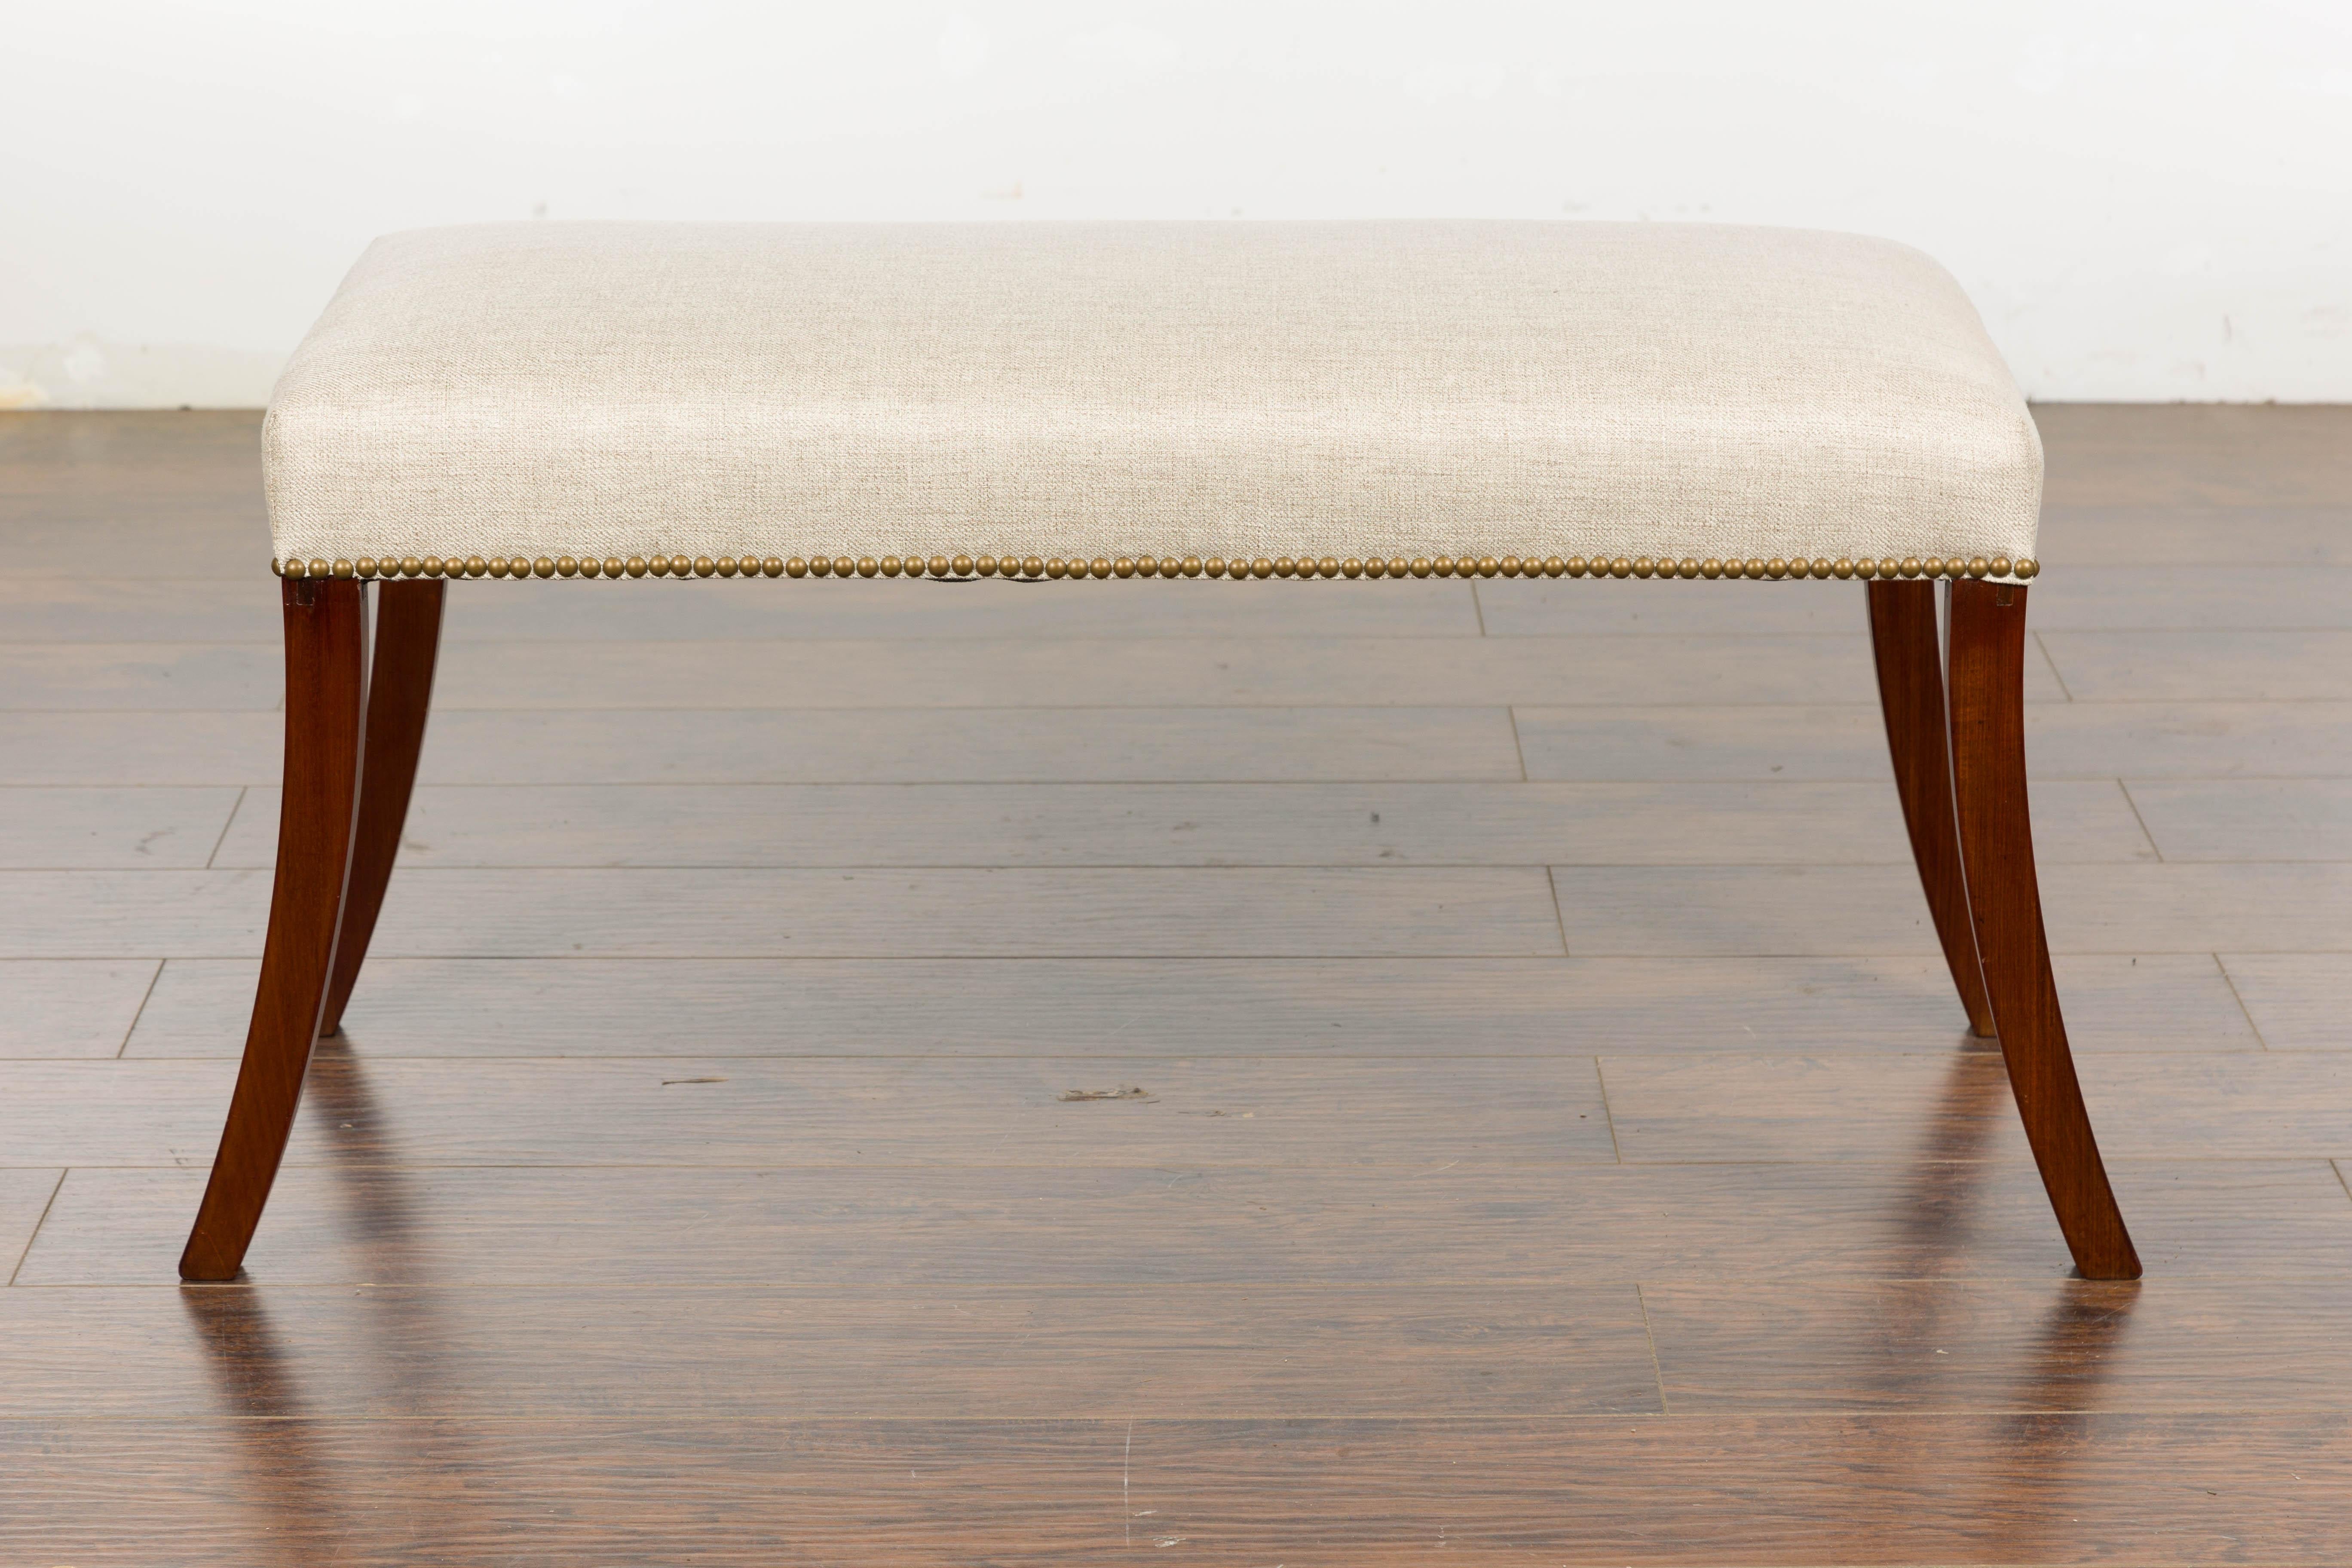 19th Century English Regency Bench with Saber Legs and Custom Linen Upholstery For Sale